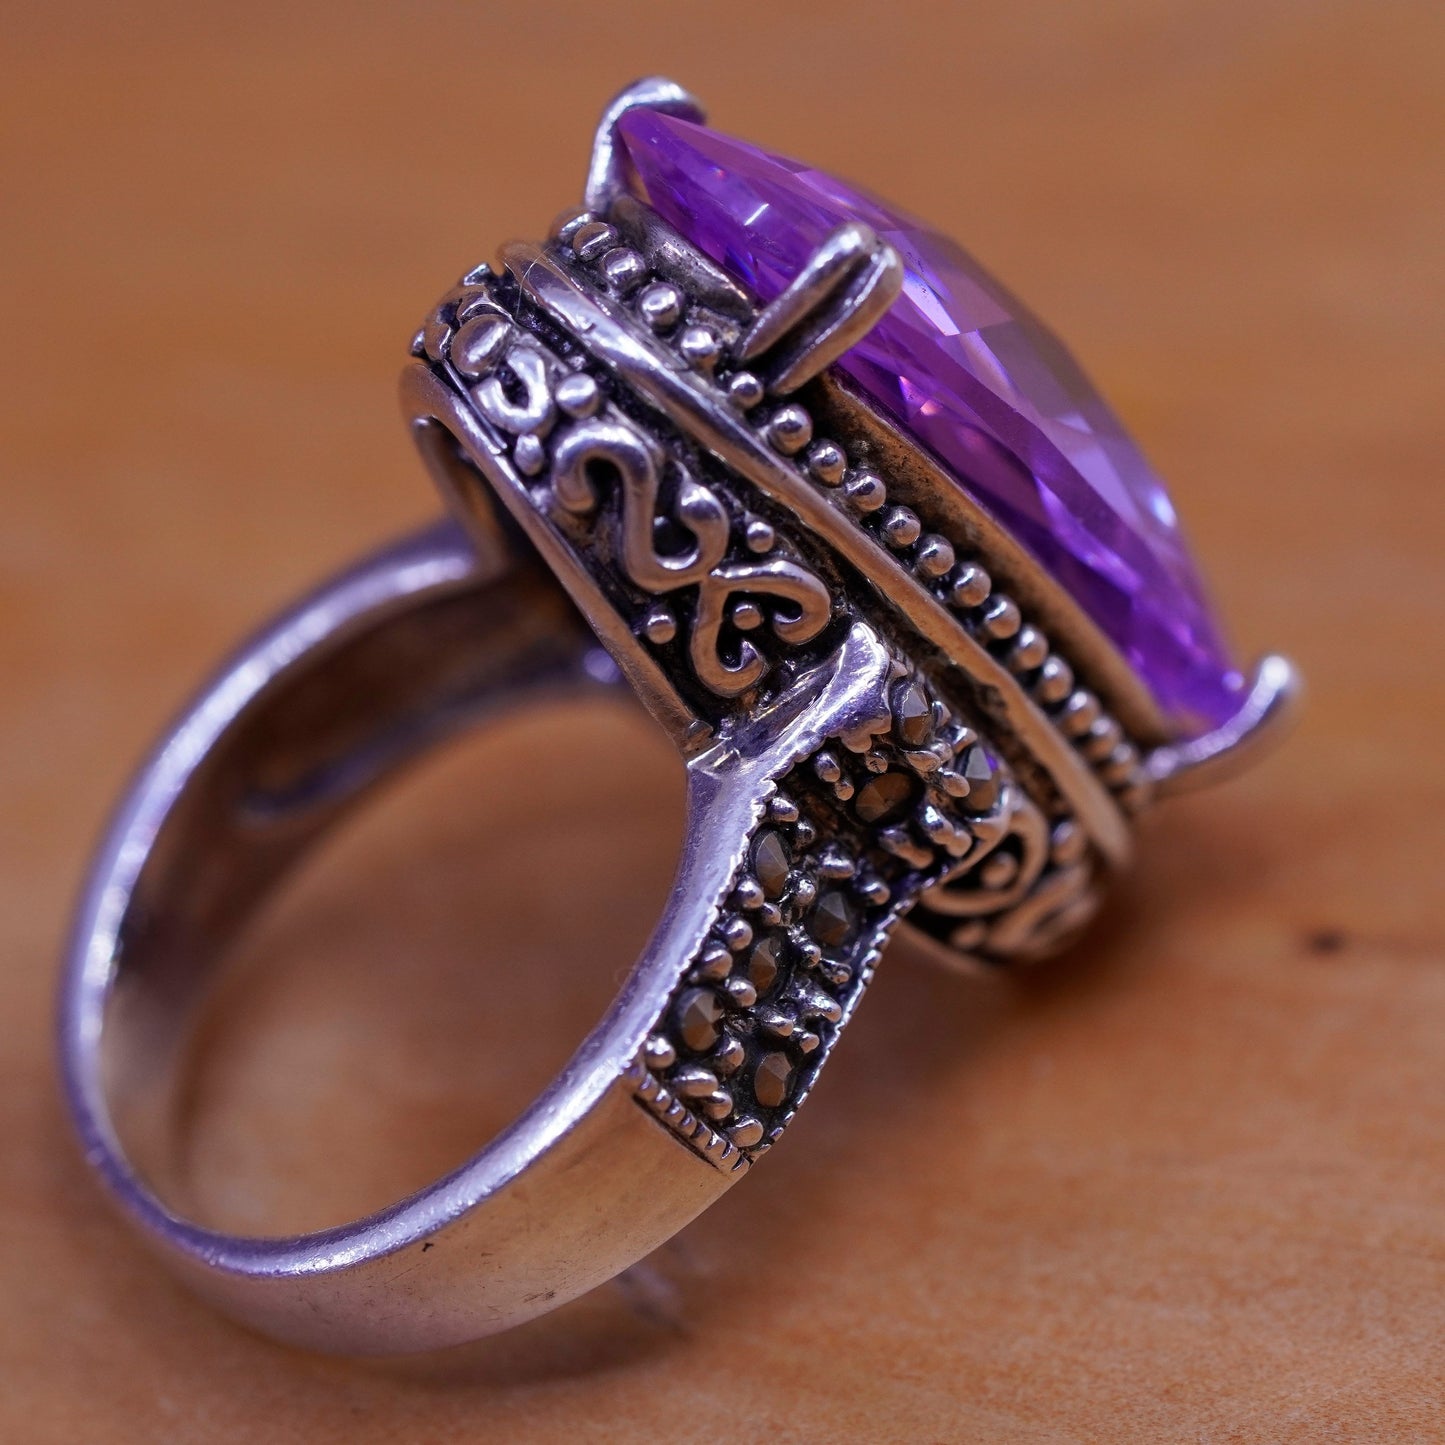 Size 6, vintage Sterling 925 silver handmade ring with amethyst marcasite beads